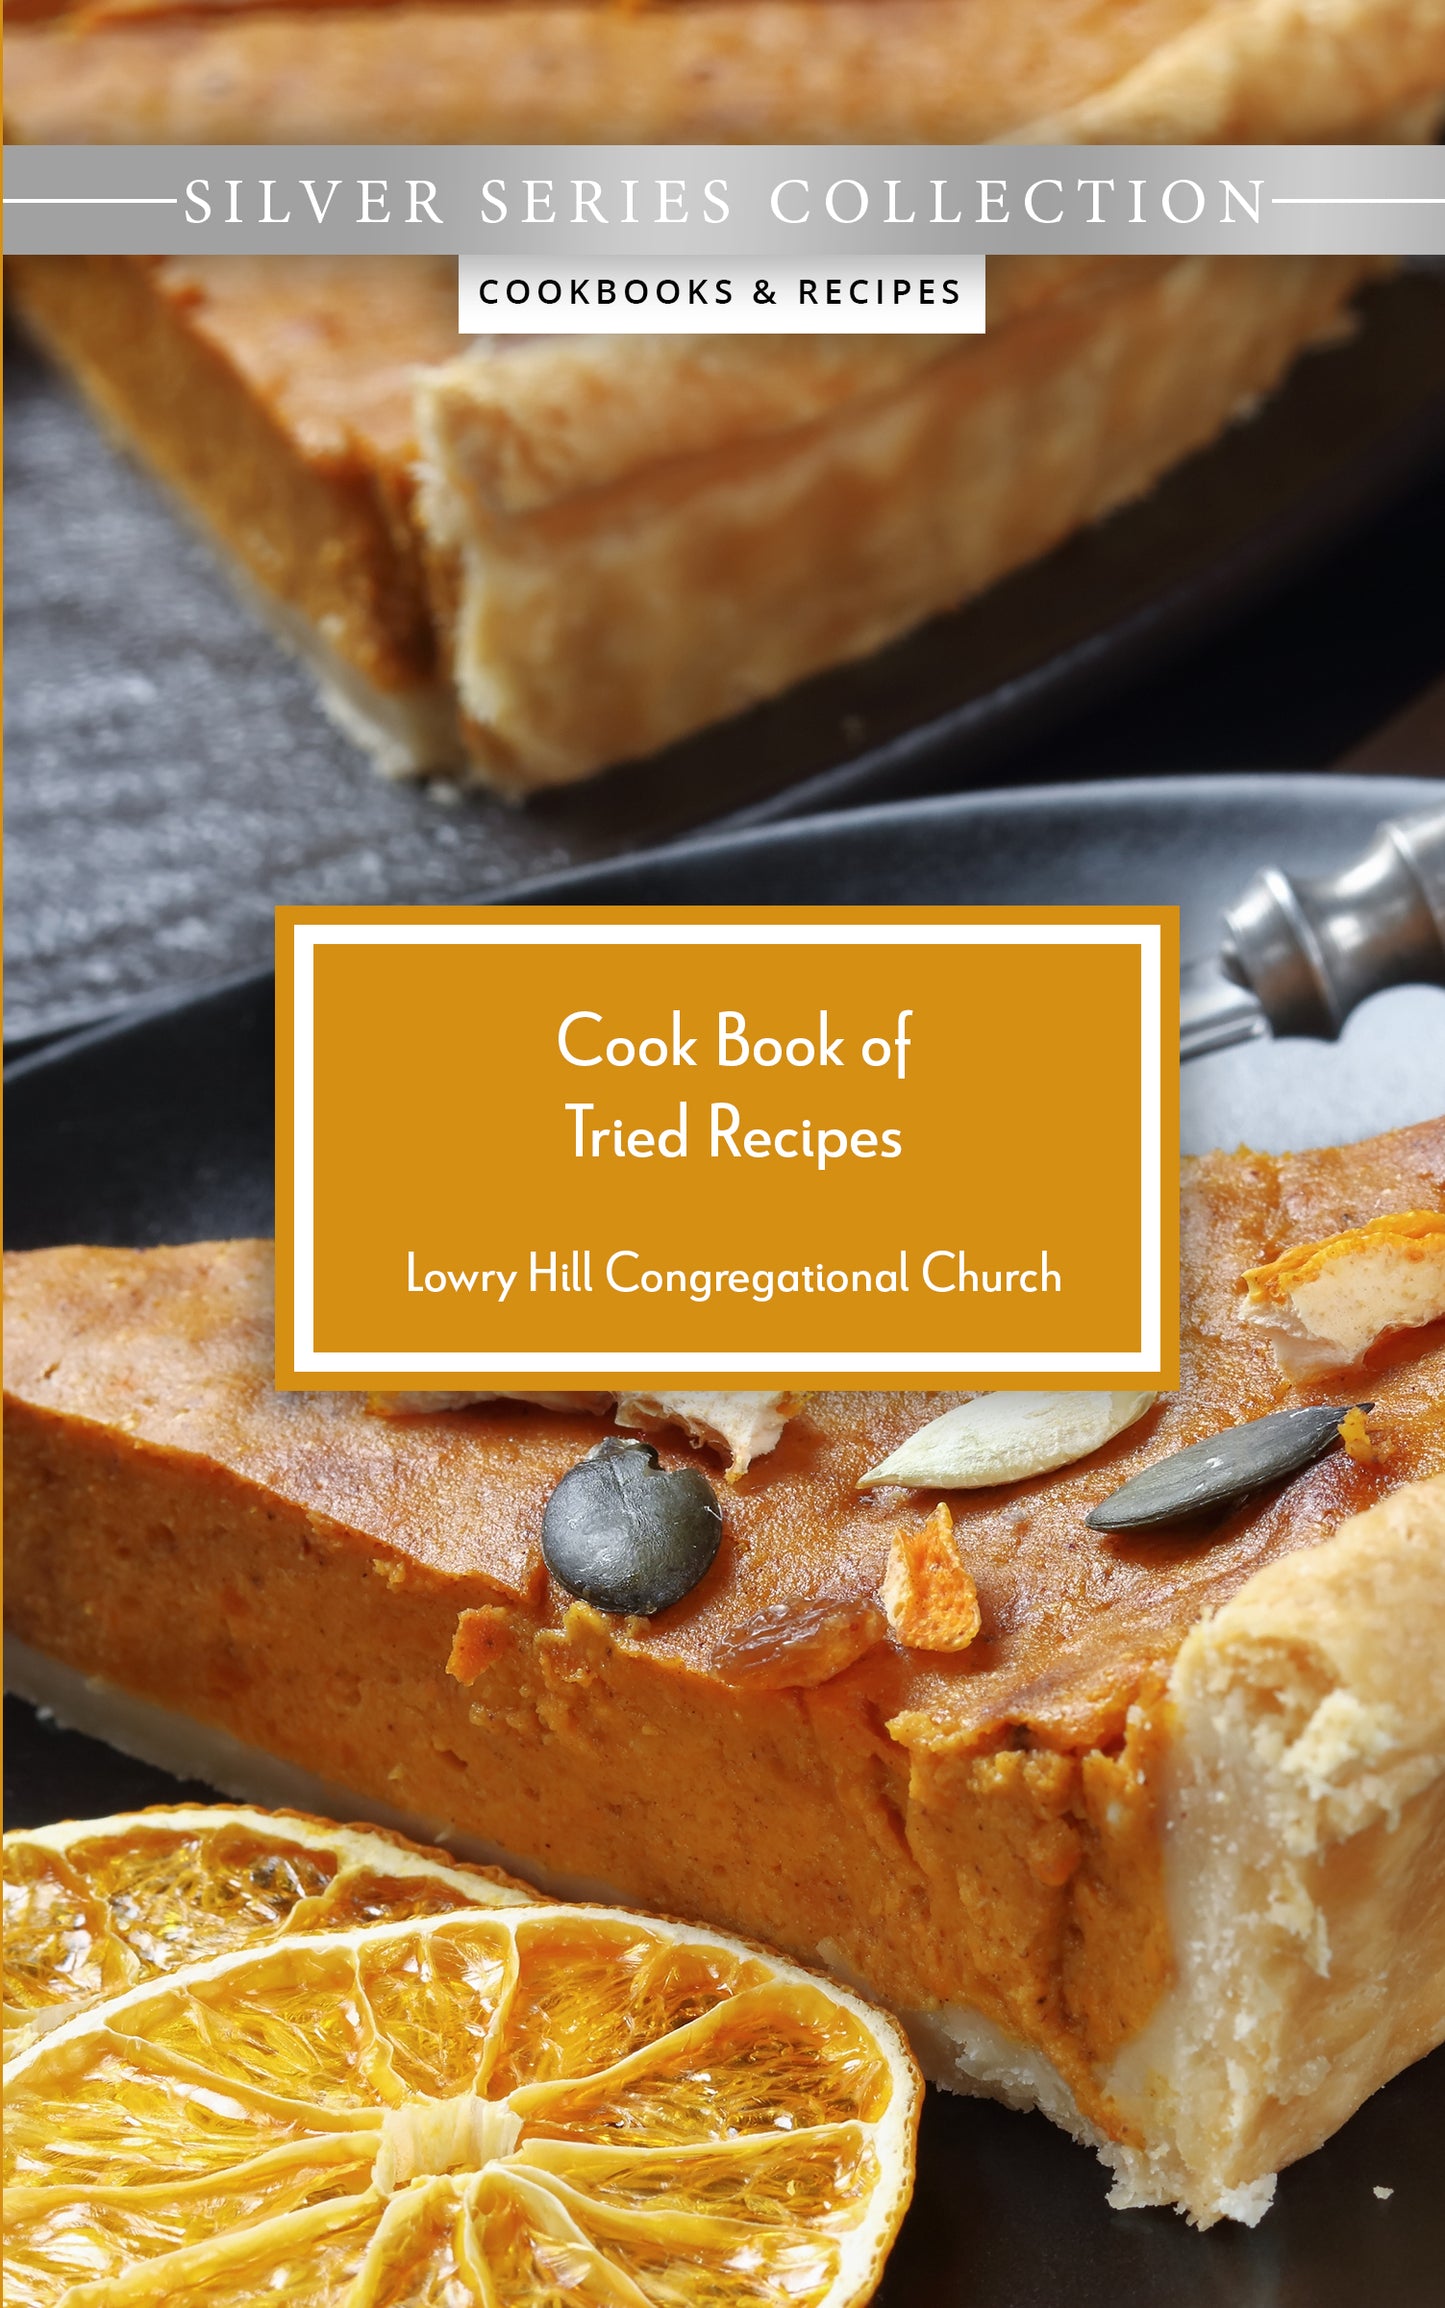 Cook Book of Tried Recipes